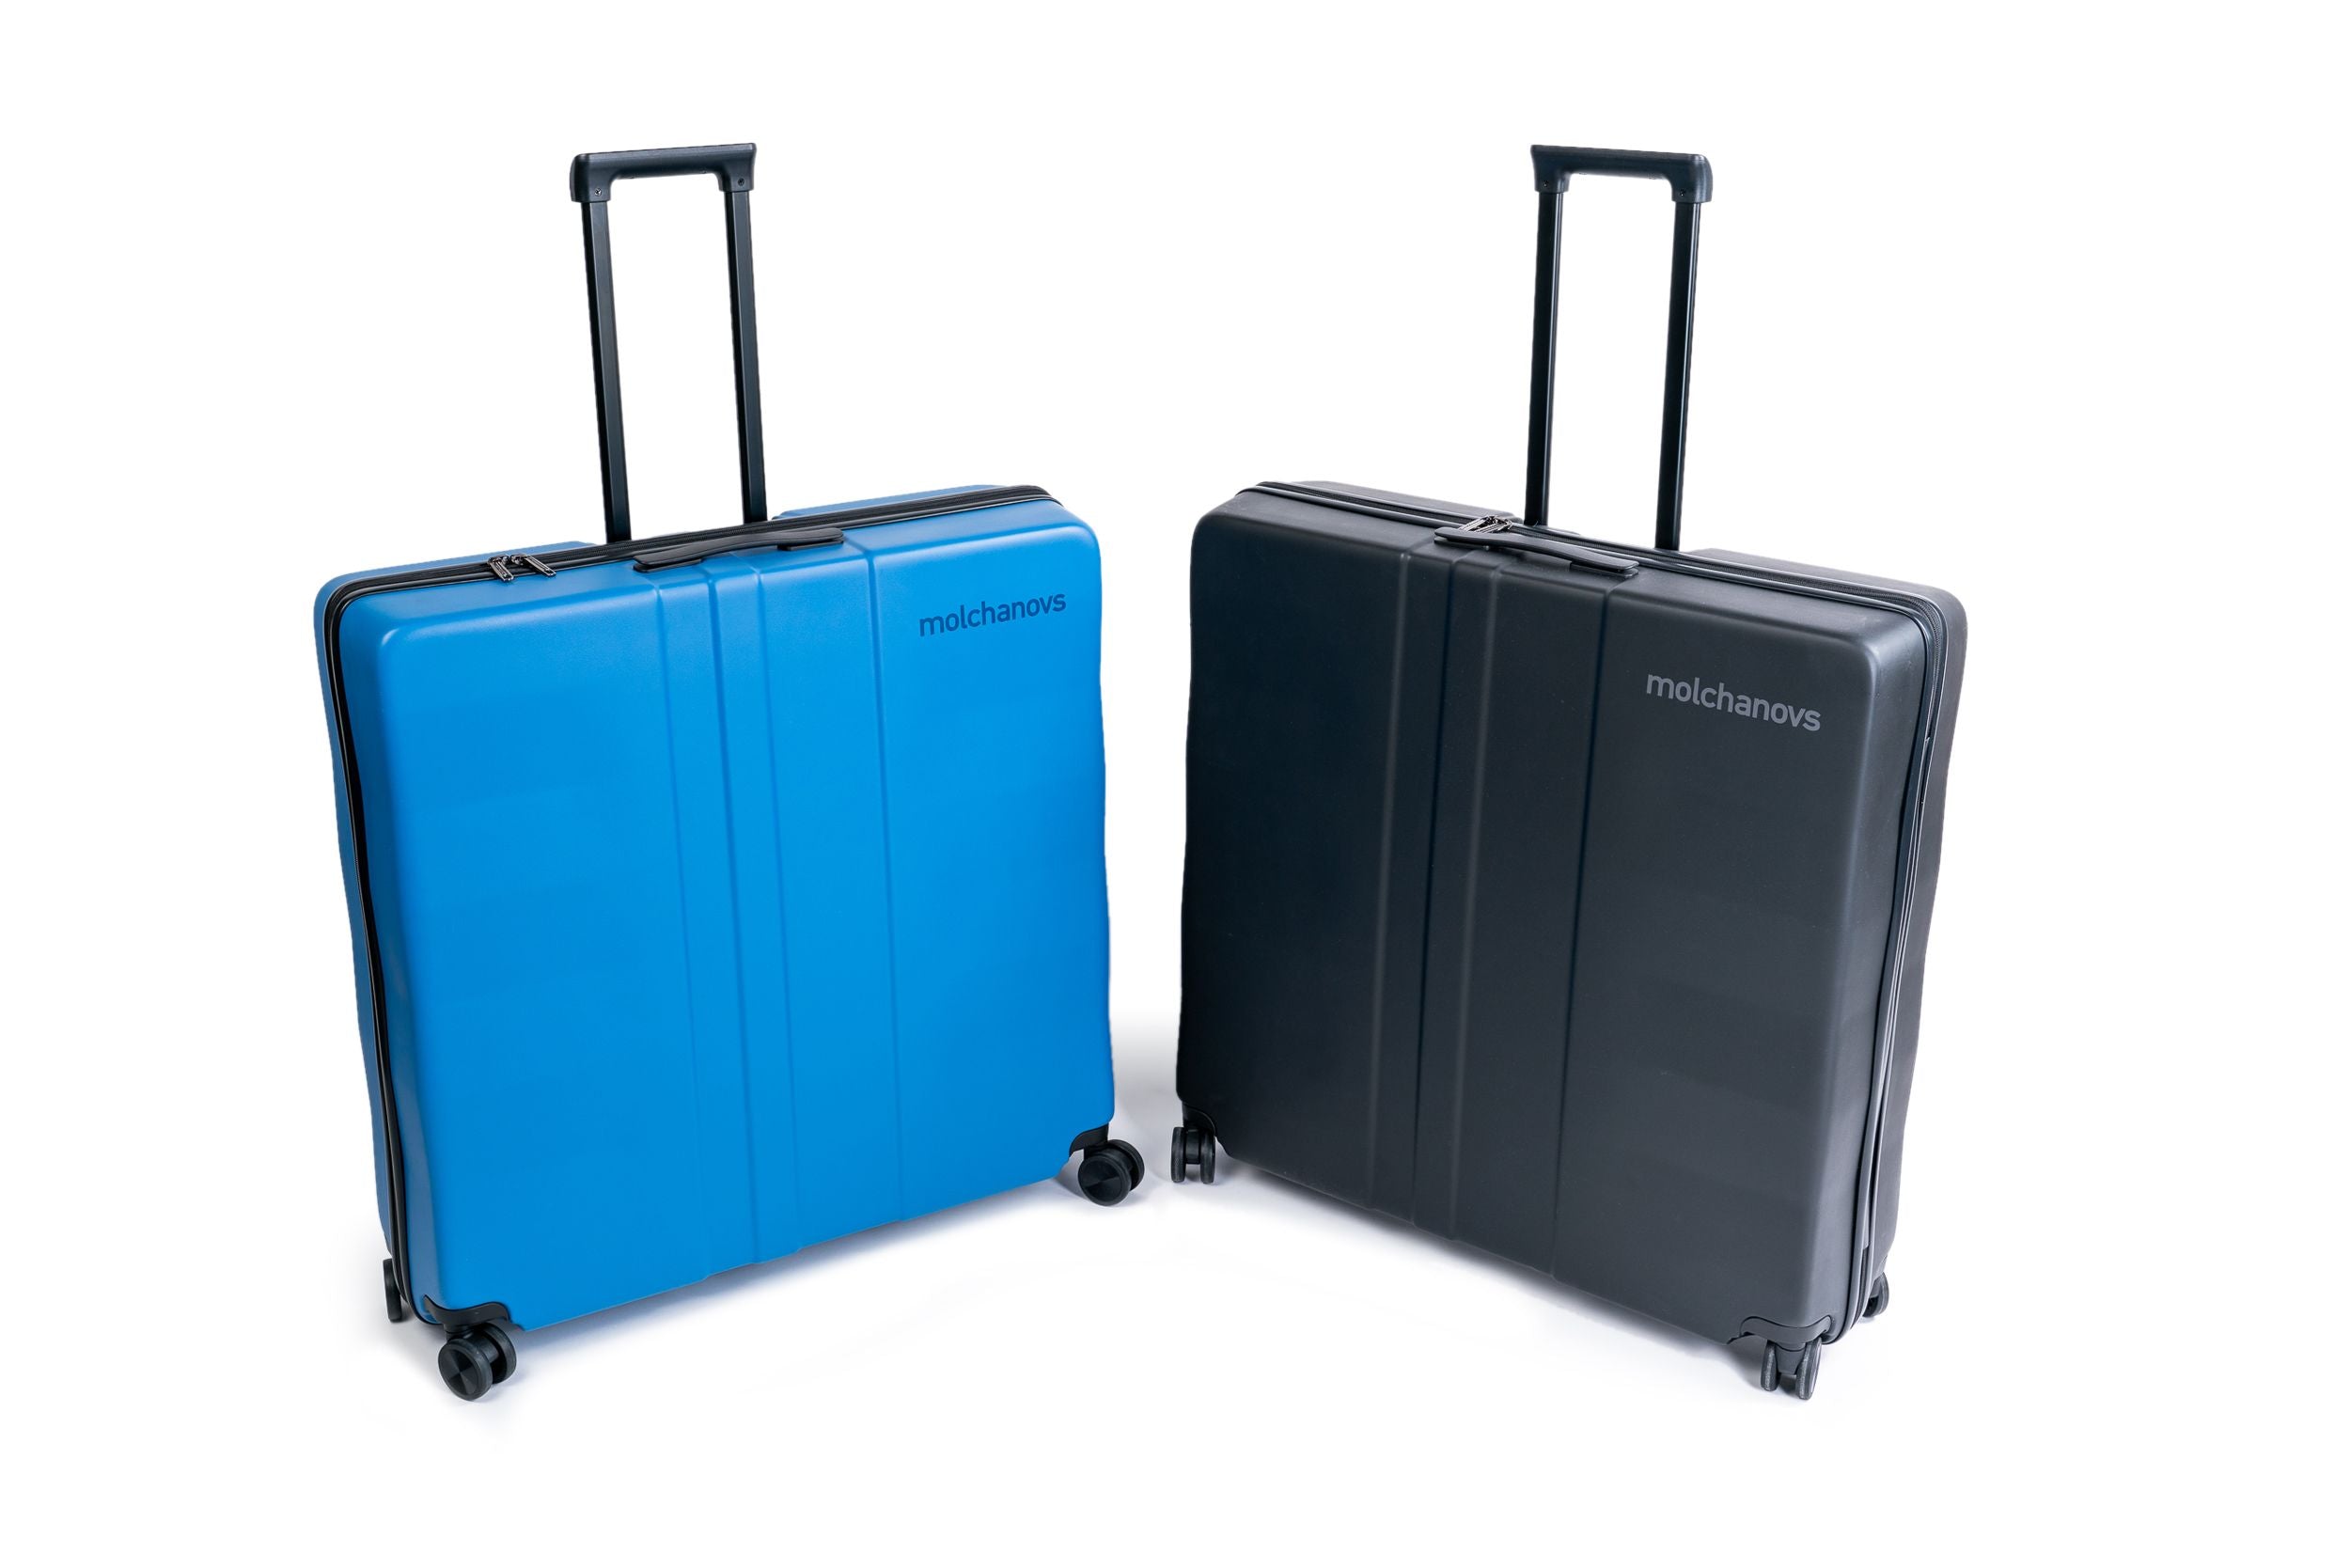 Studio shot of two Hard Cases, the blue on the left and black on the right